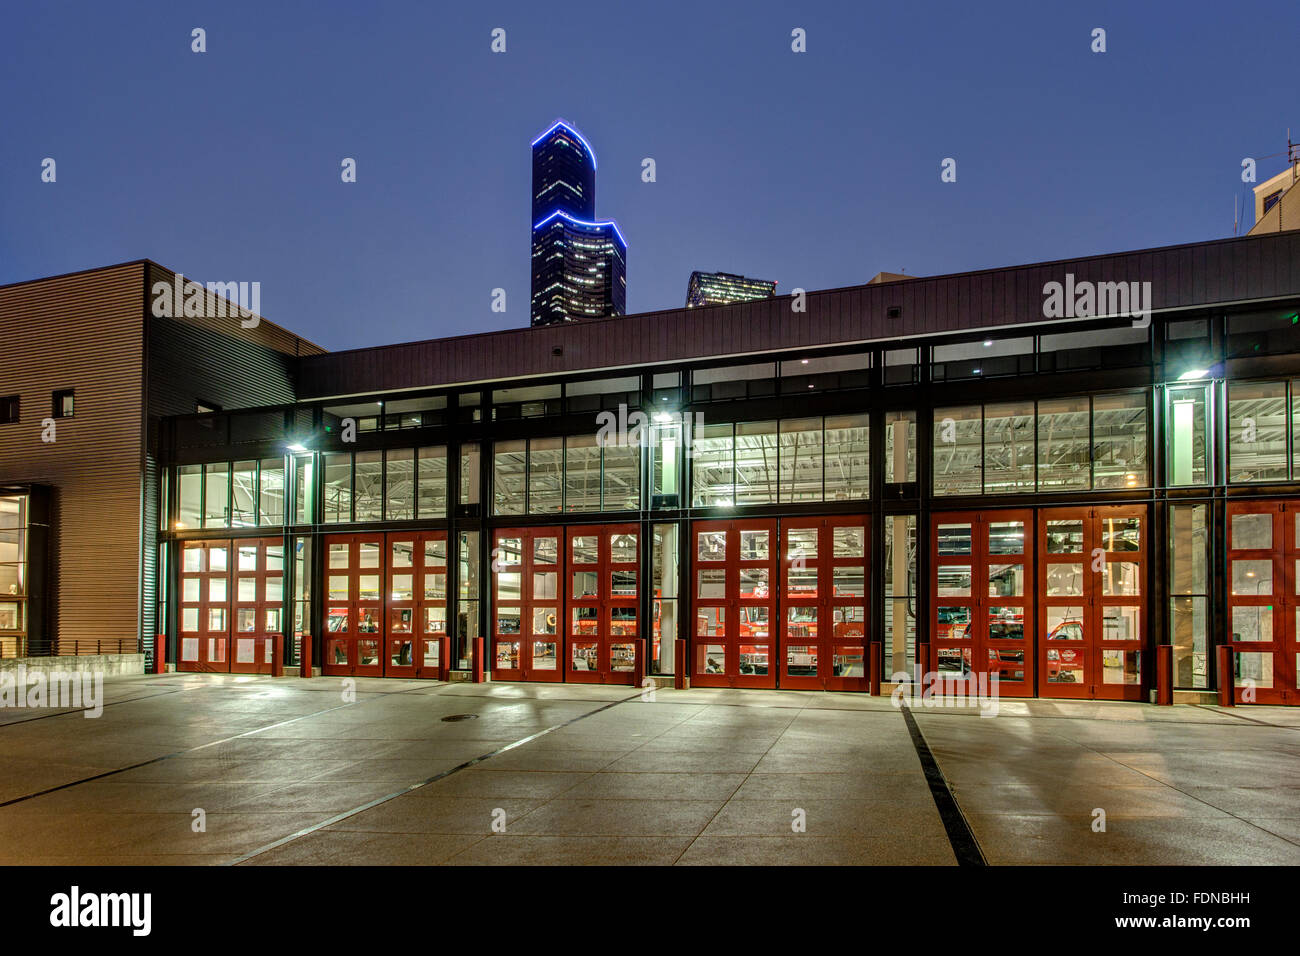 Fire Station in Seattle Washington USA.  Photographed at twilight. Stock Photo